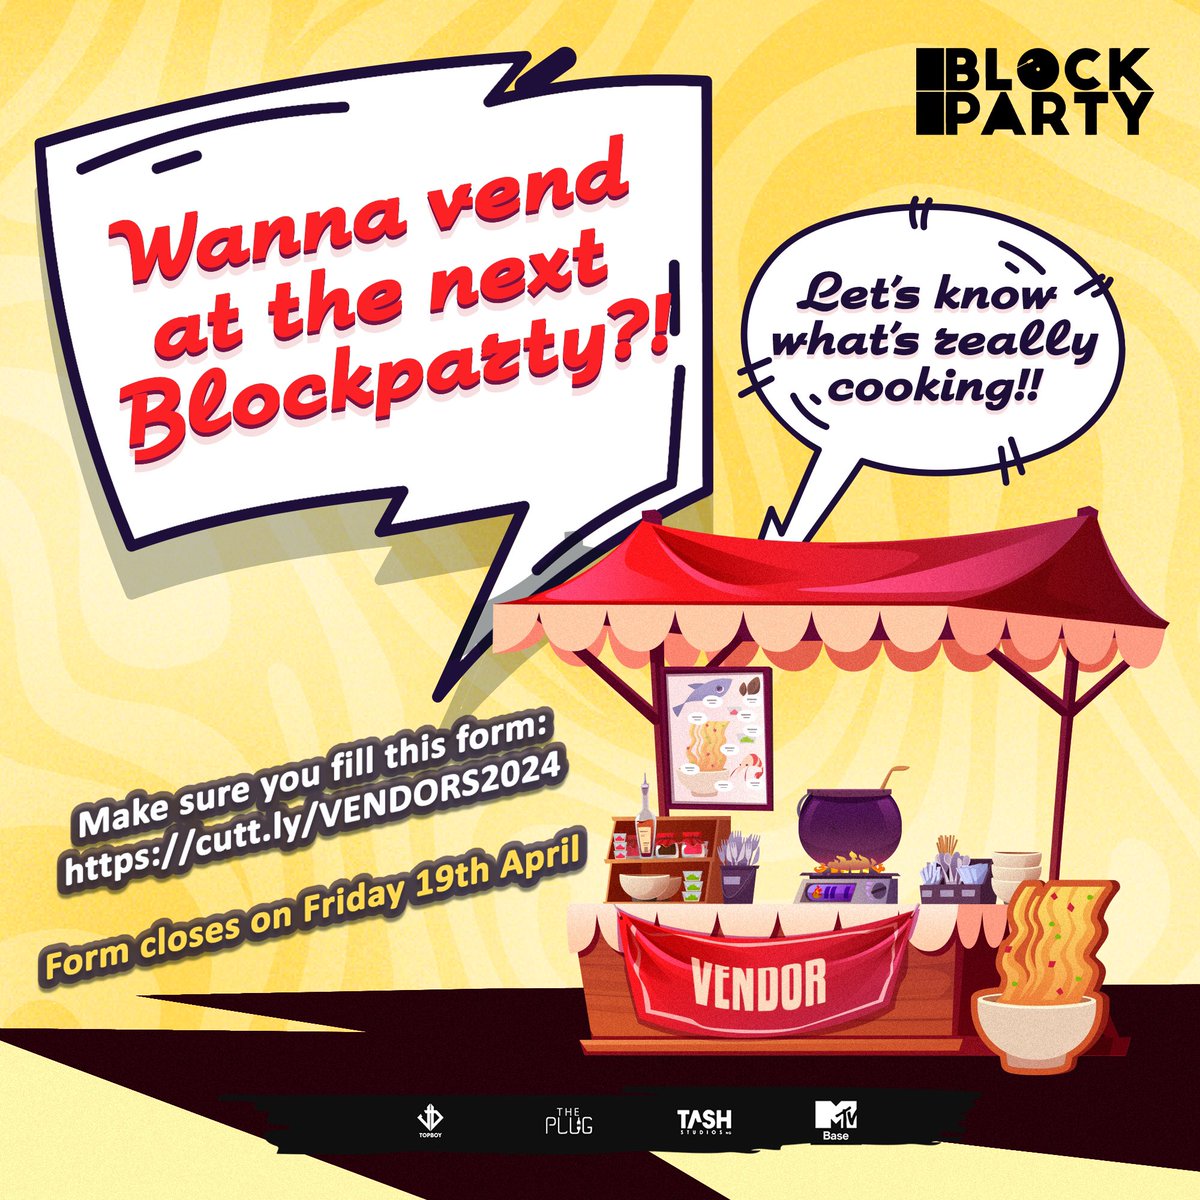 Calling all food vendors! 🥗🍕 Excited for the next BlockParty? So are we! If you've got delicious eats that you think would rock the block, we want to hear from you. Sign up here: cutt.ly/VENDORS2024